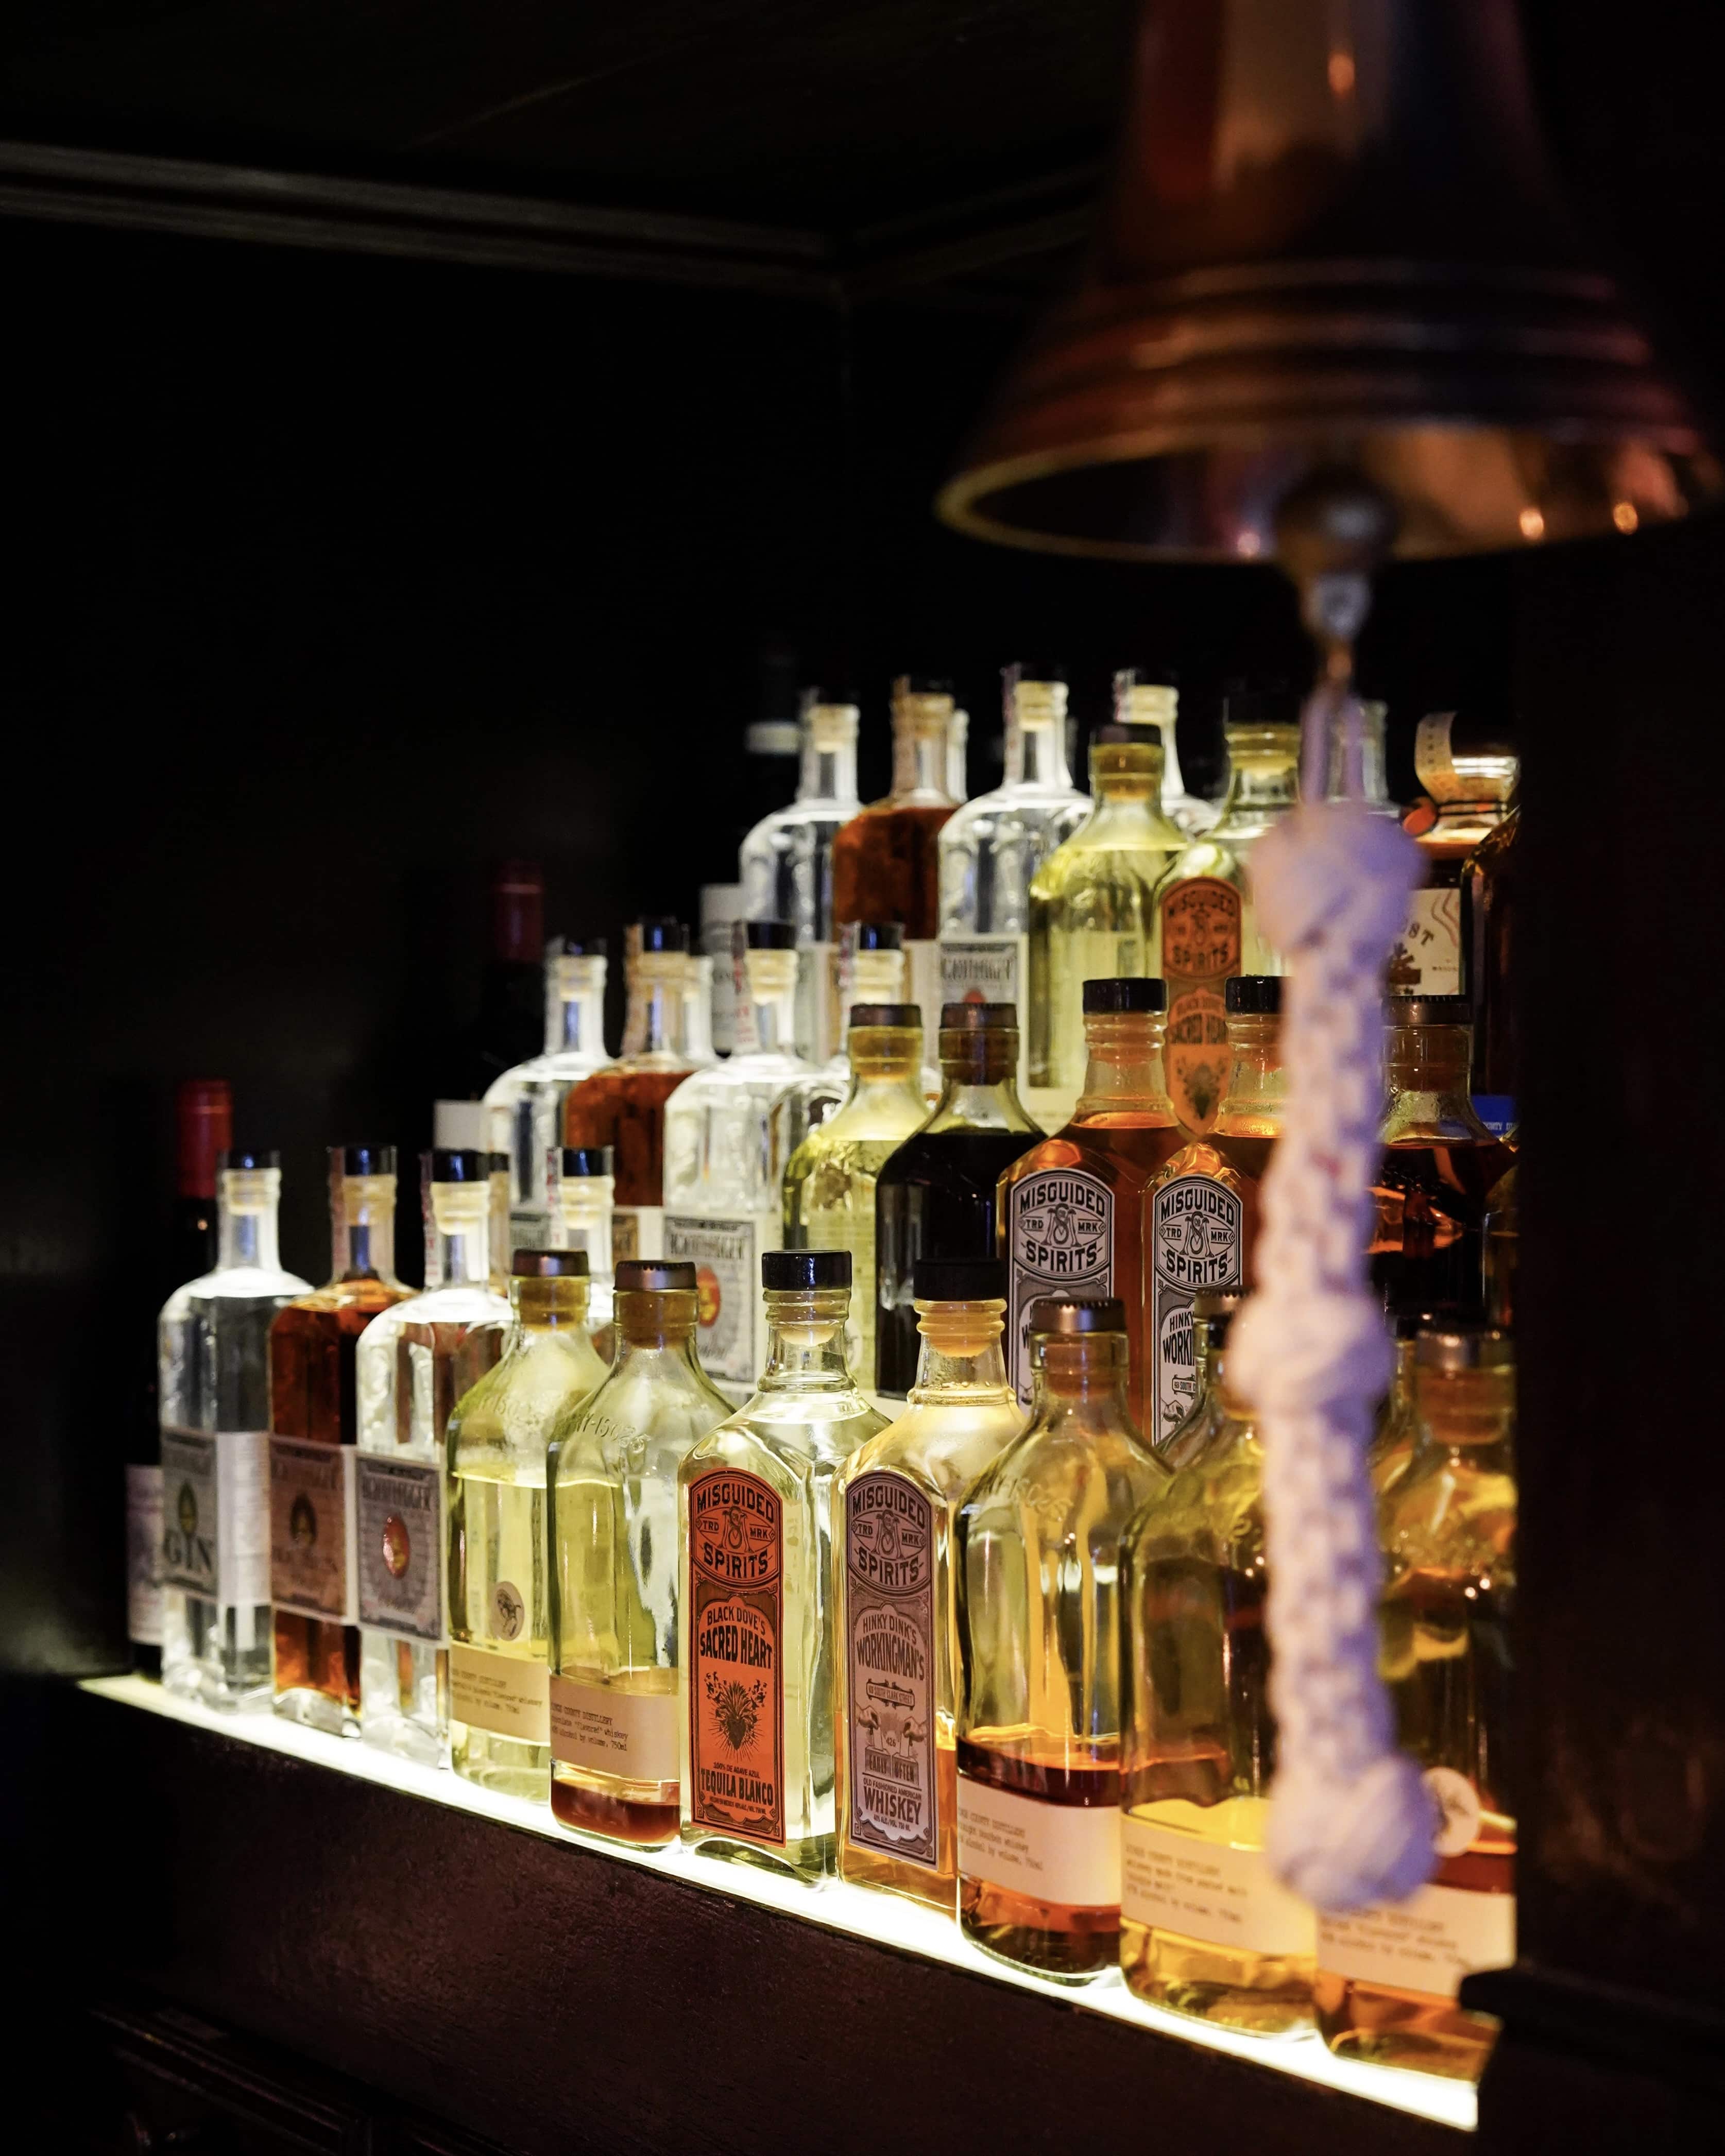 Image 3- Bar with rows of bottles